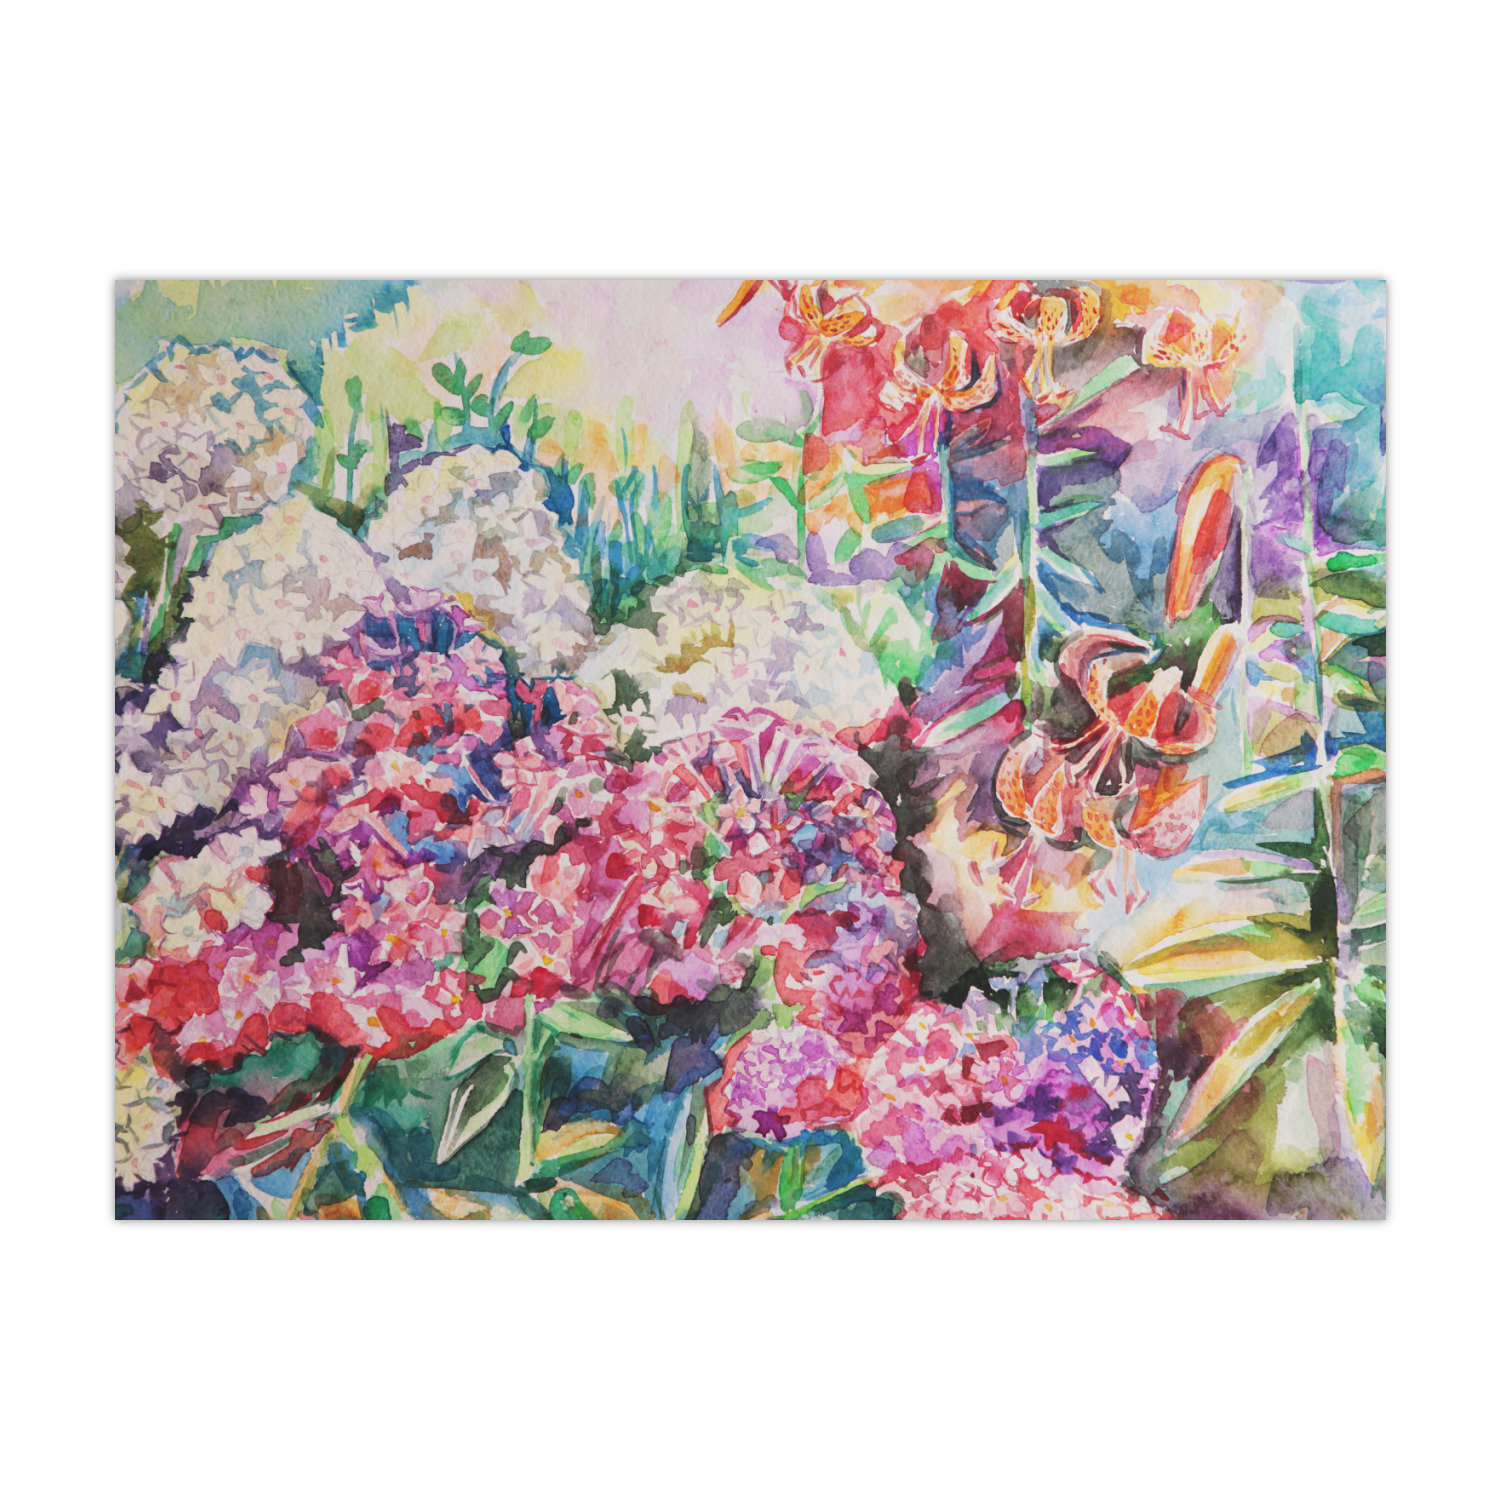 Custom Watercolor Floral Tissue Paper Sheets